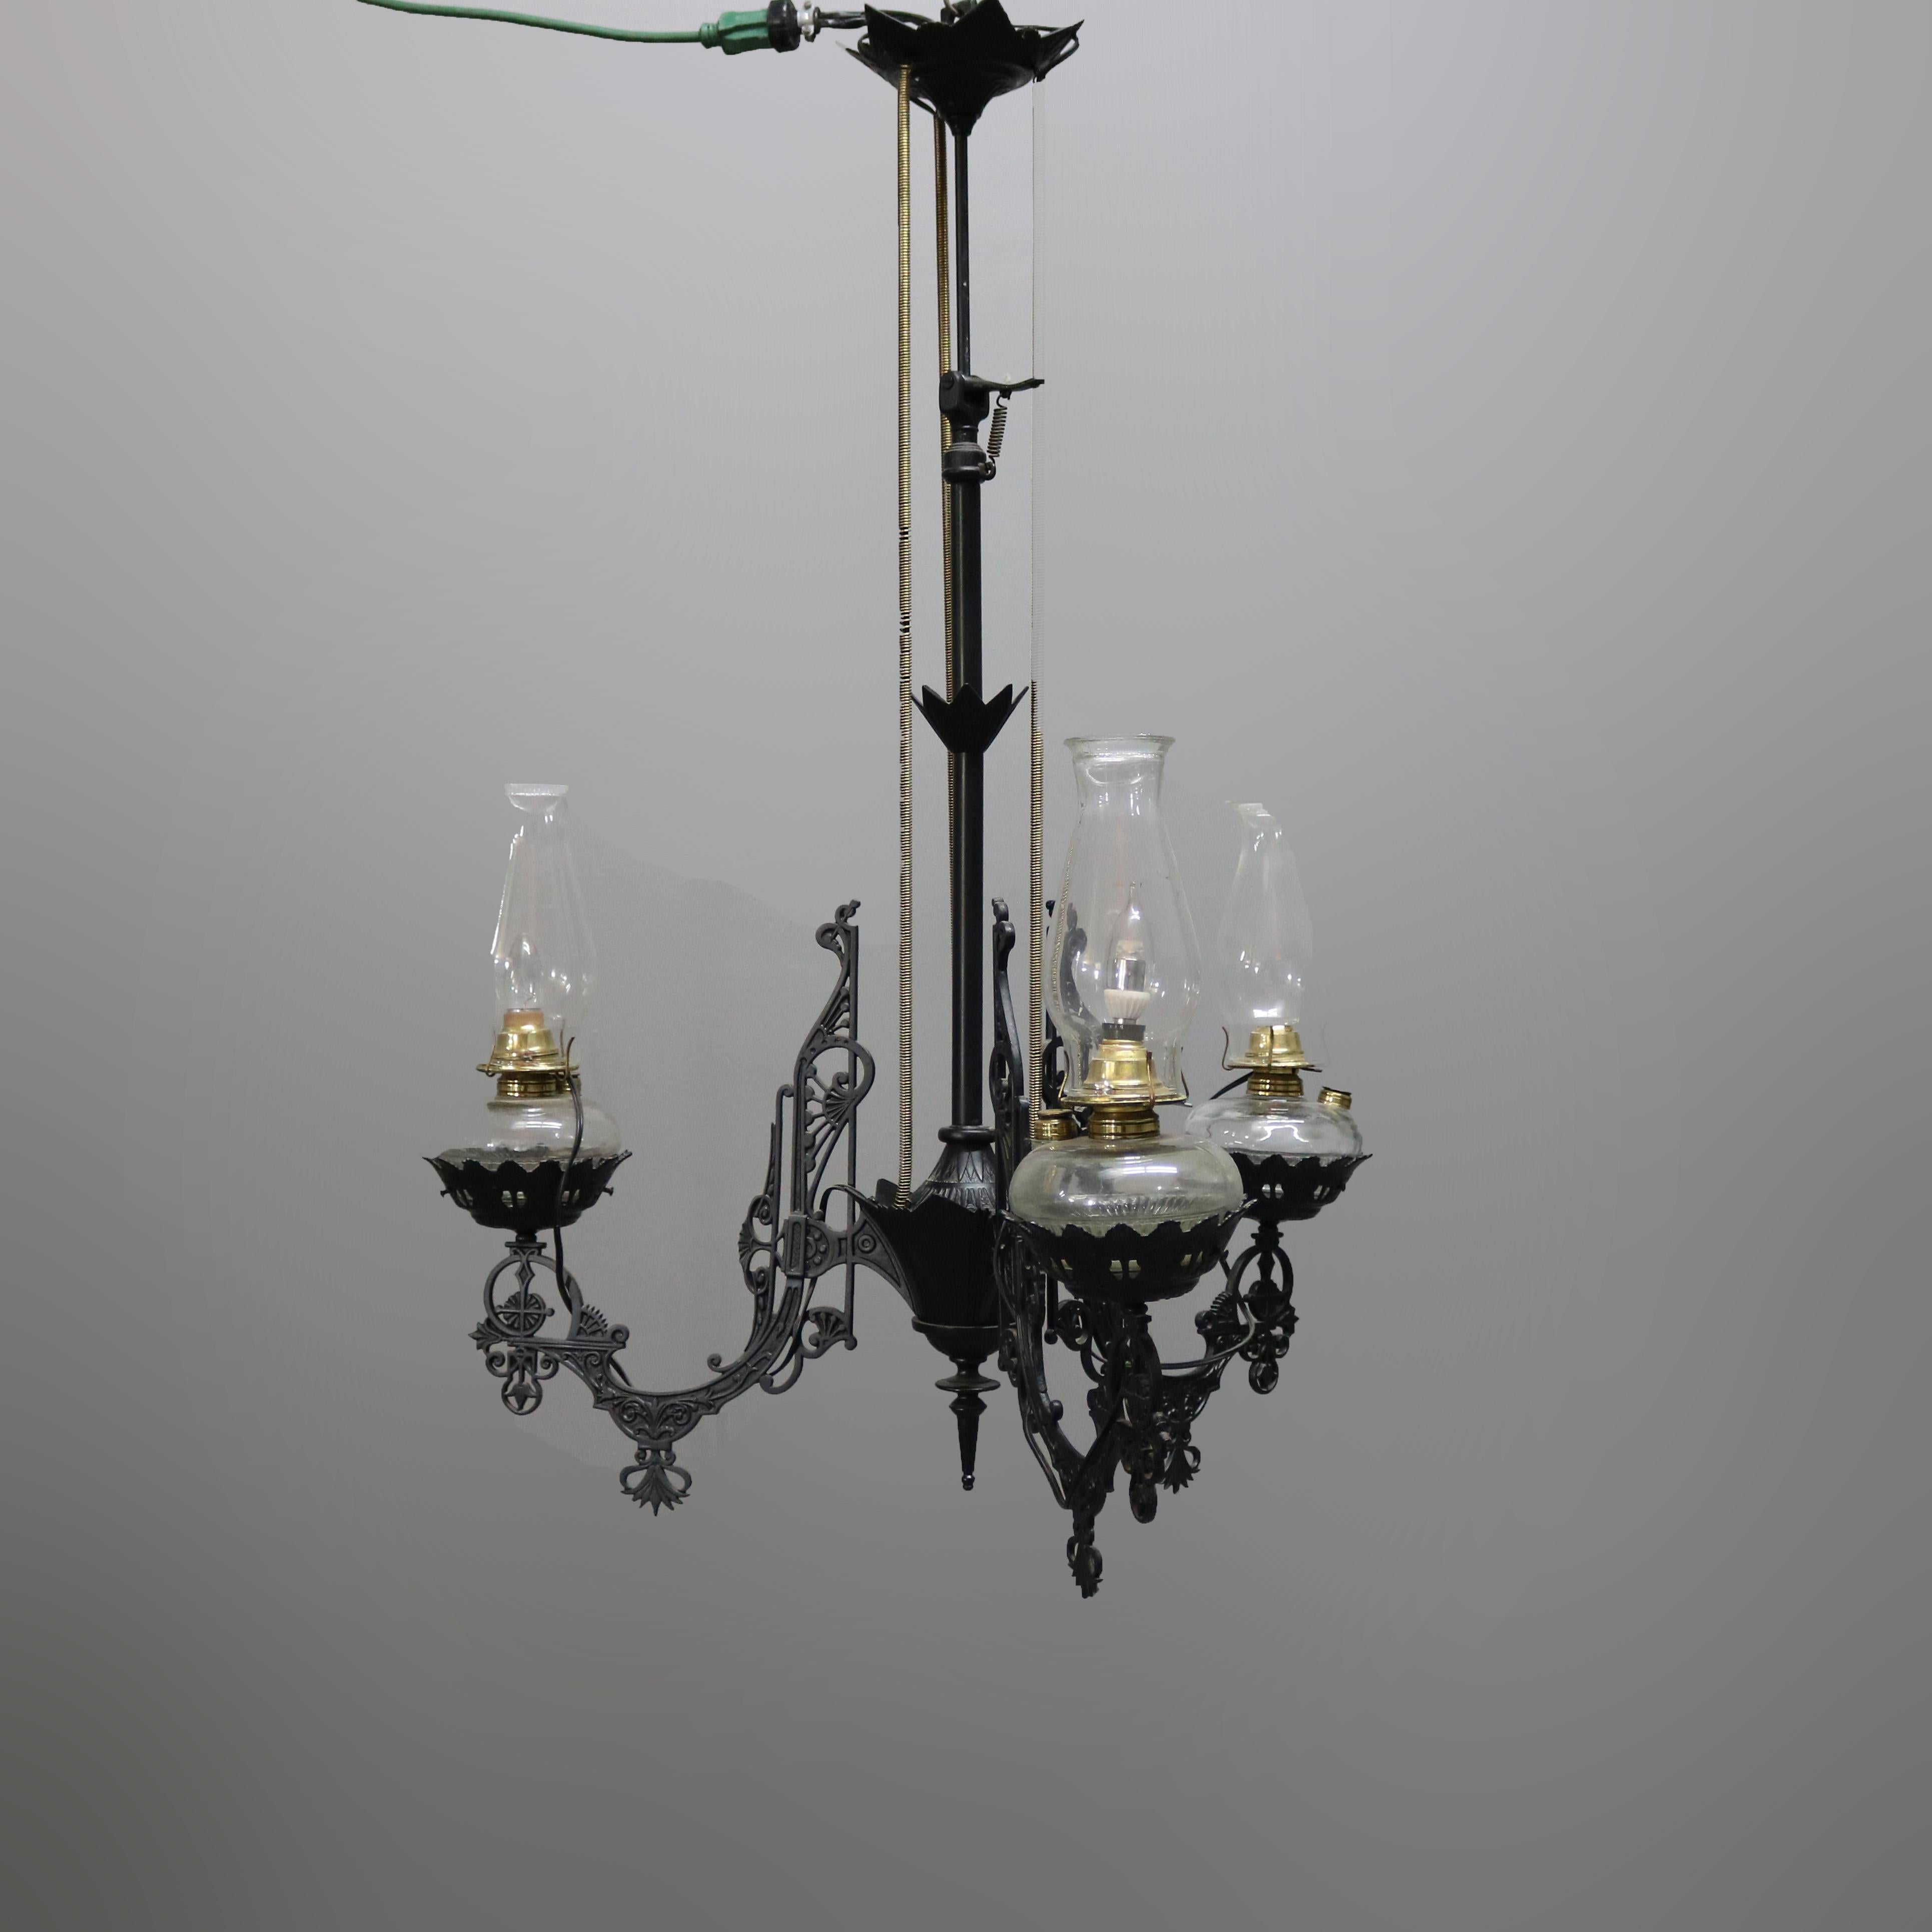 An antique Victorian iron horse hanging light offers cast iron construction with three arms terminating in electrified lights with glass shades, 19th century. 

Measures: 44